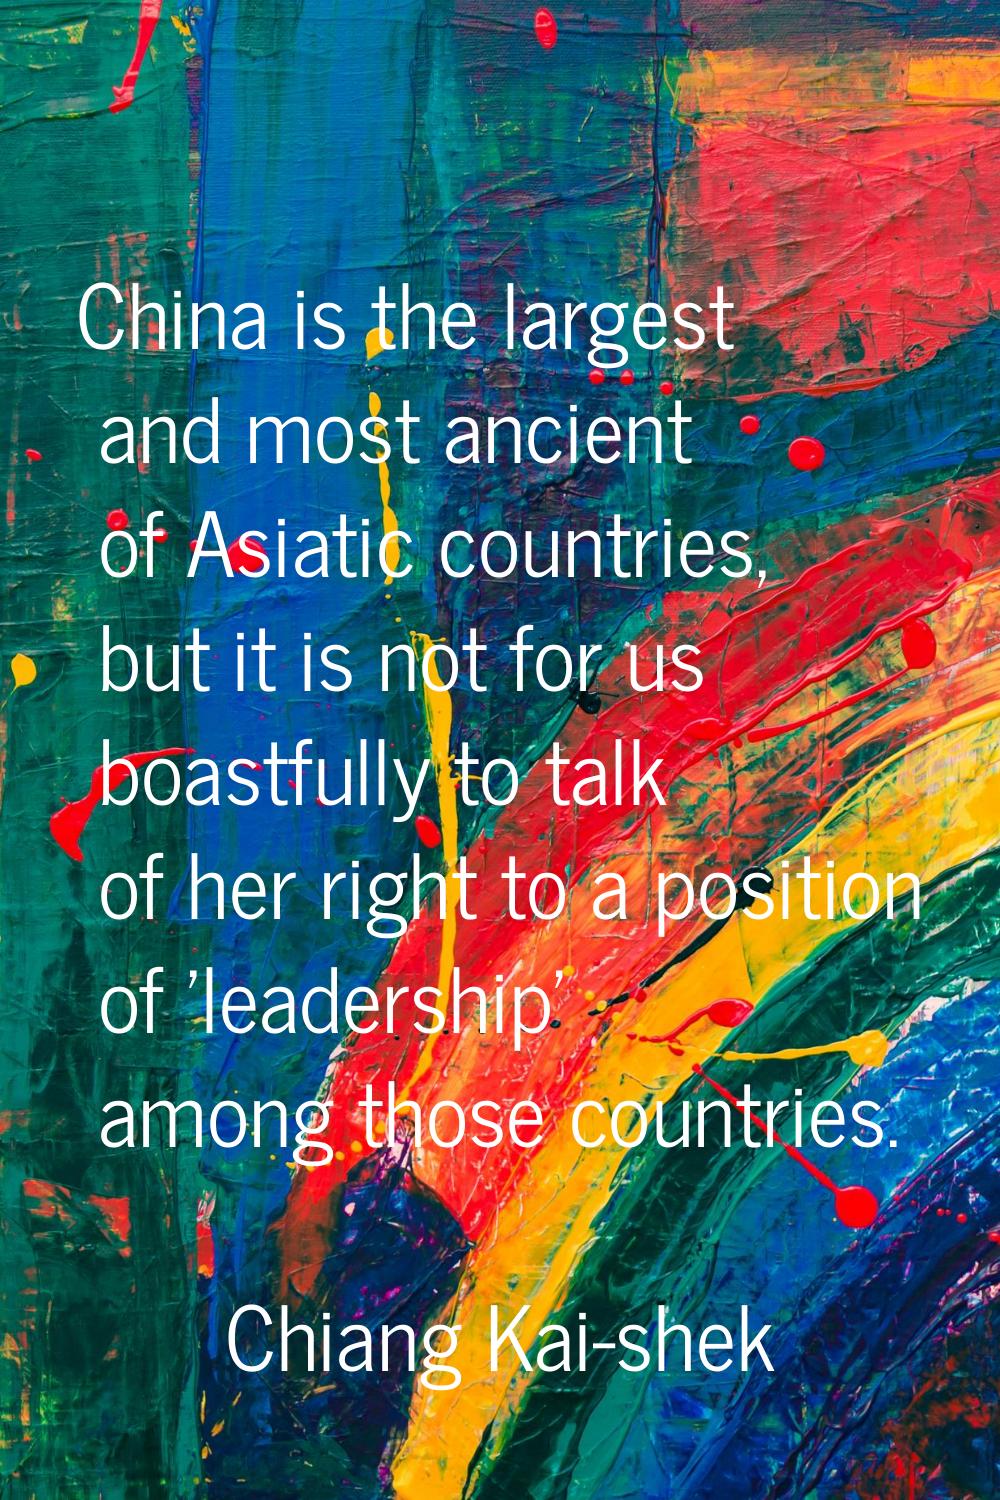 China is the largest and most ancient of Asiatic countries, but it is not for us boastfully to talk